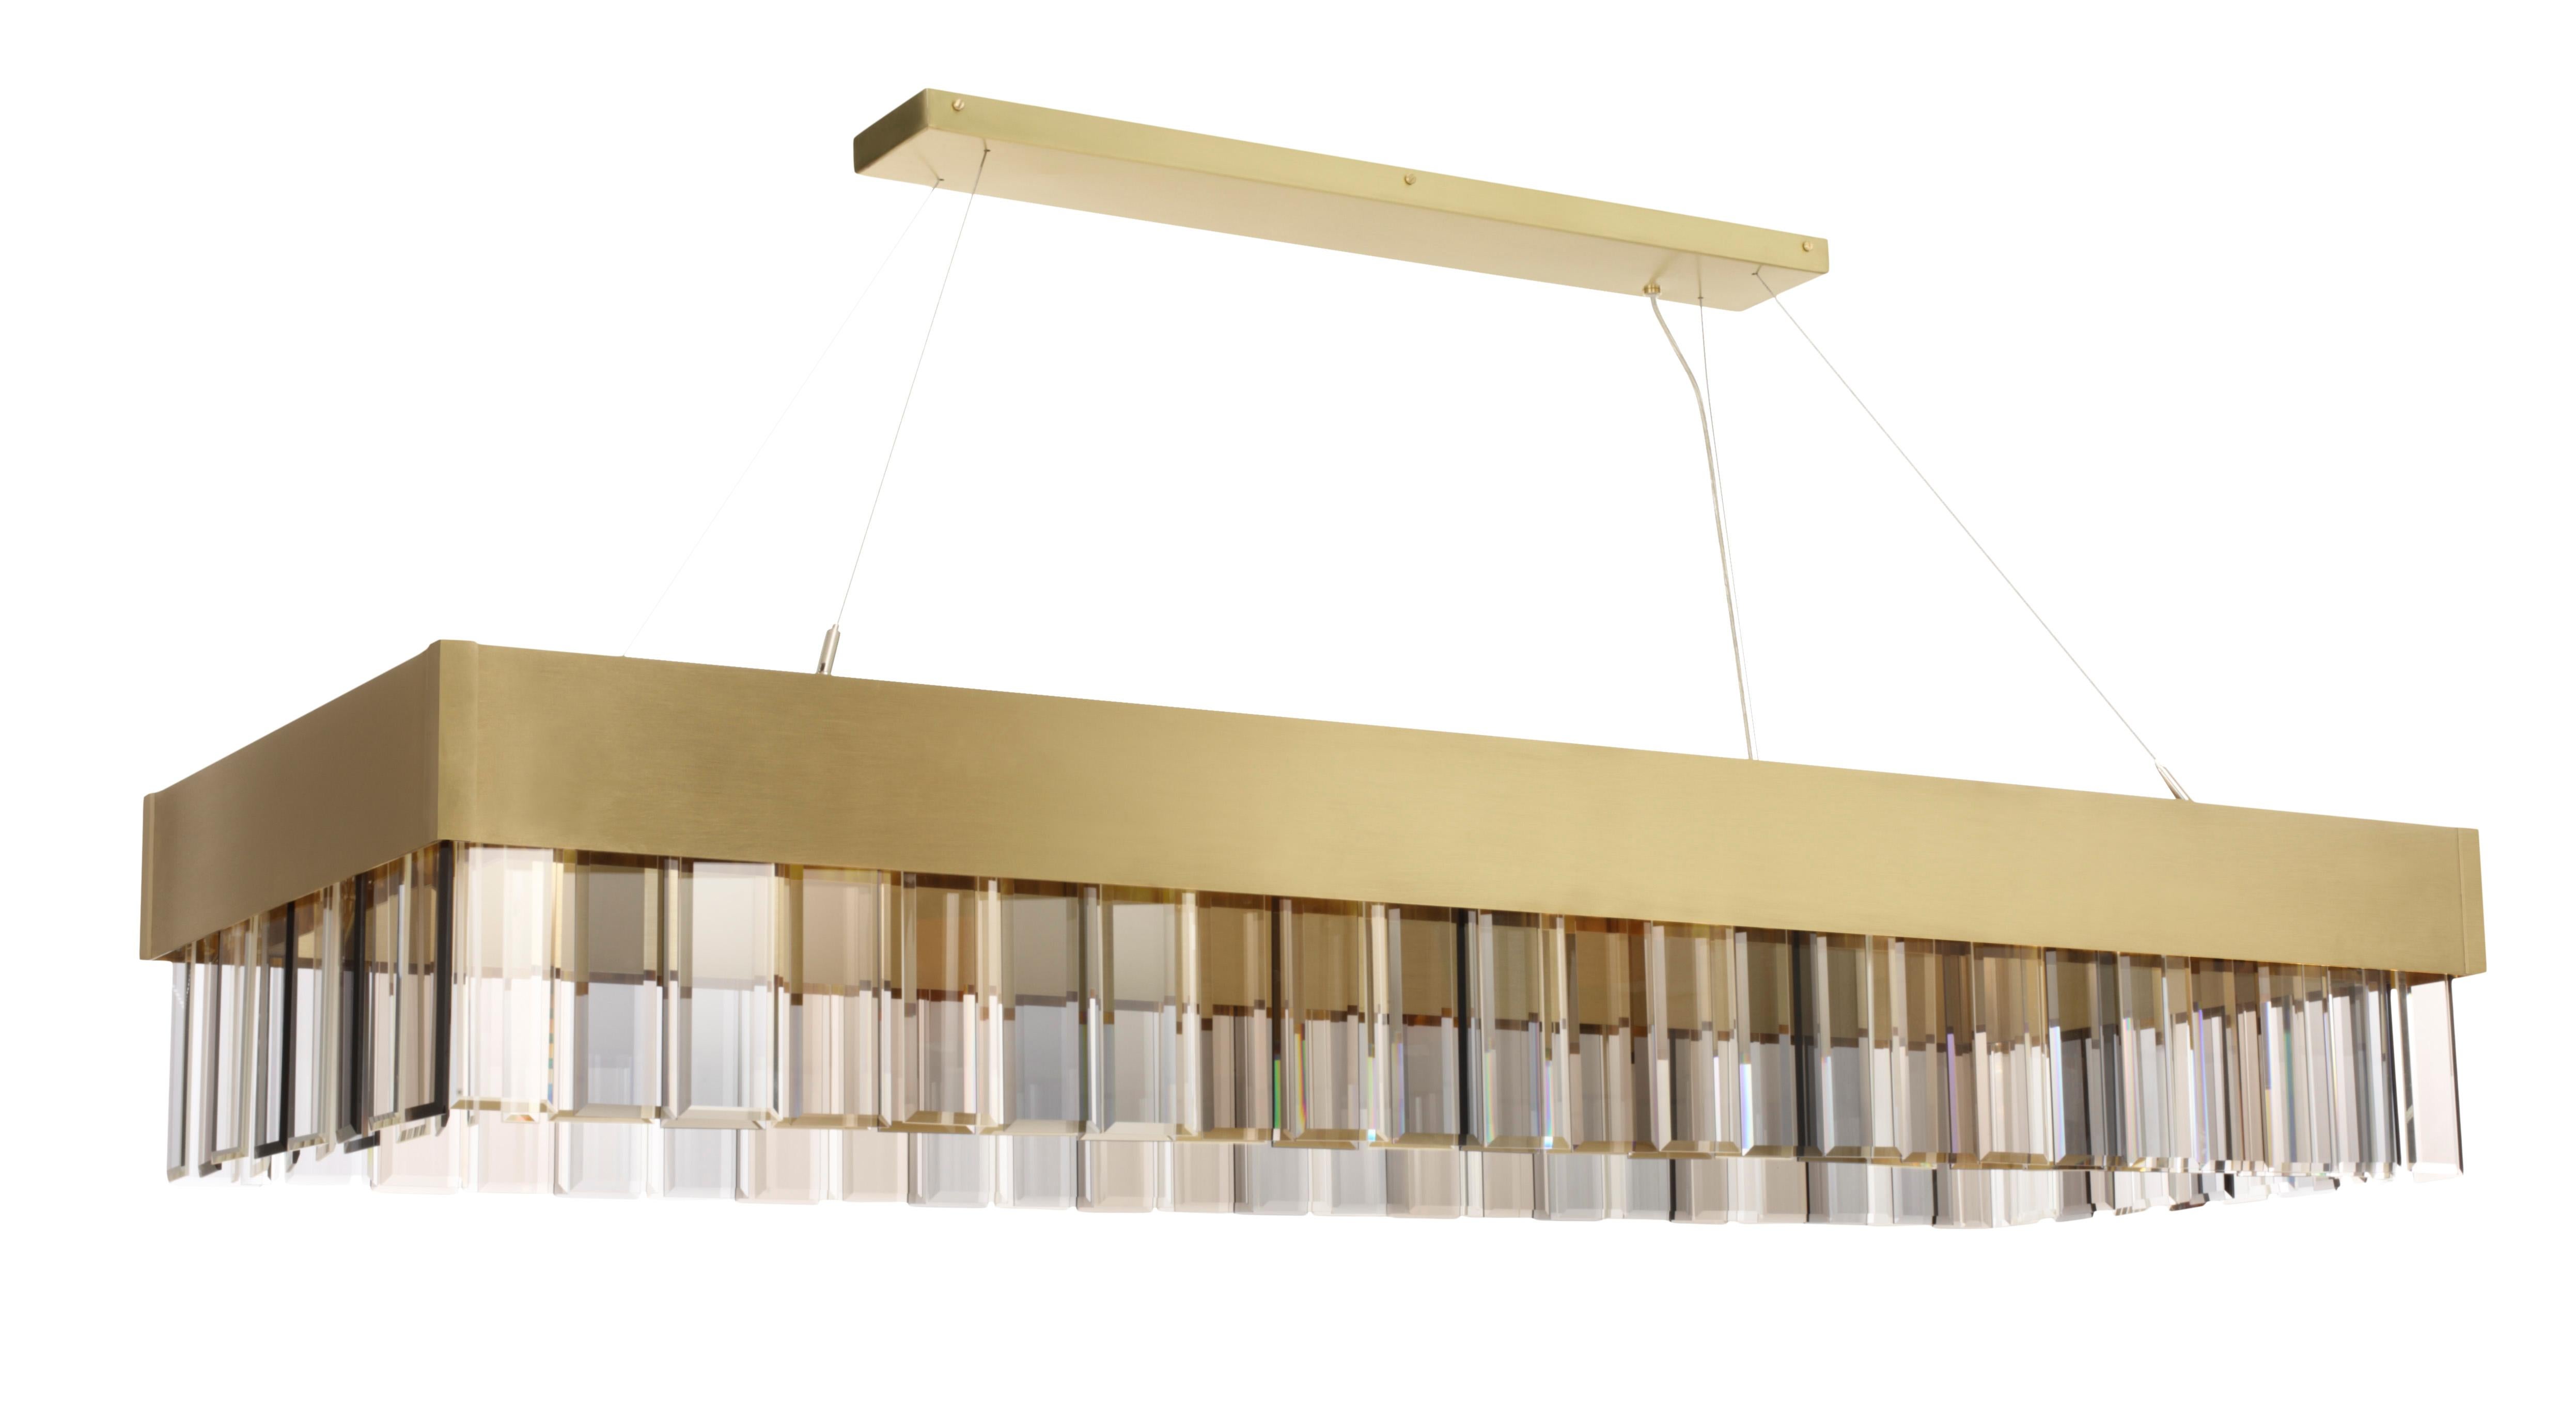 Solaris longlight pendant by CTO Lighting
Materials: satin brass with cut glass drops and stainless steel suspension wire/clear flex
Dimensions: H 25 x W 140 cm 

All our lamps can be wired according to each country. If sold to the USA it will be